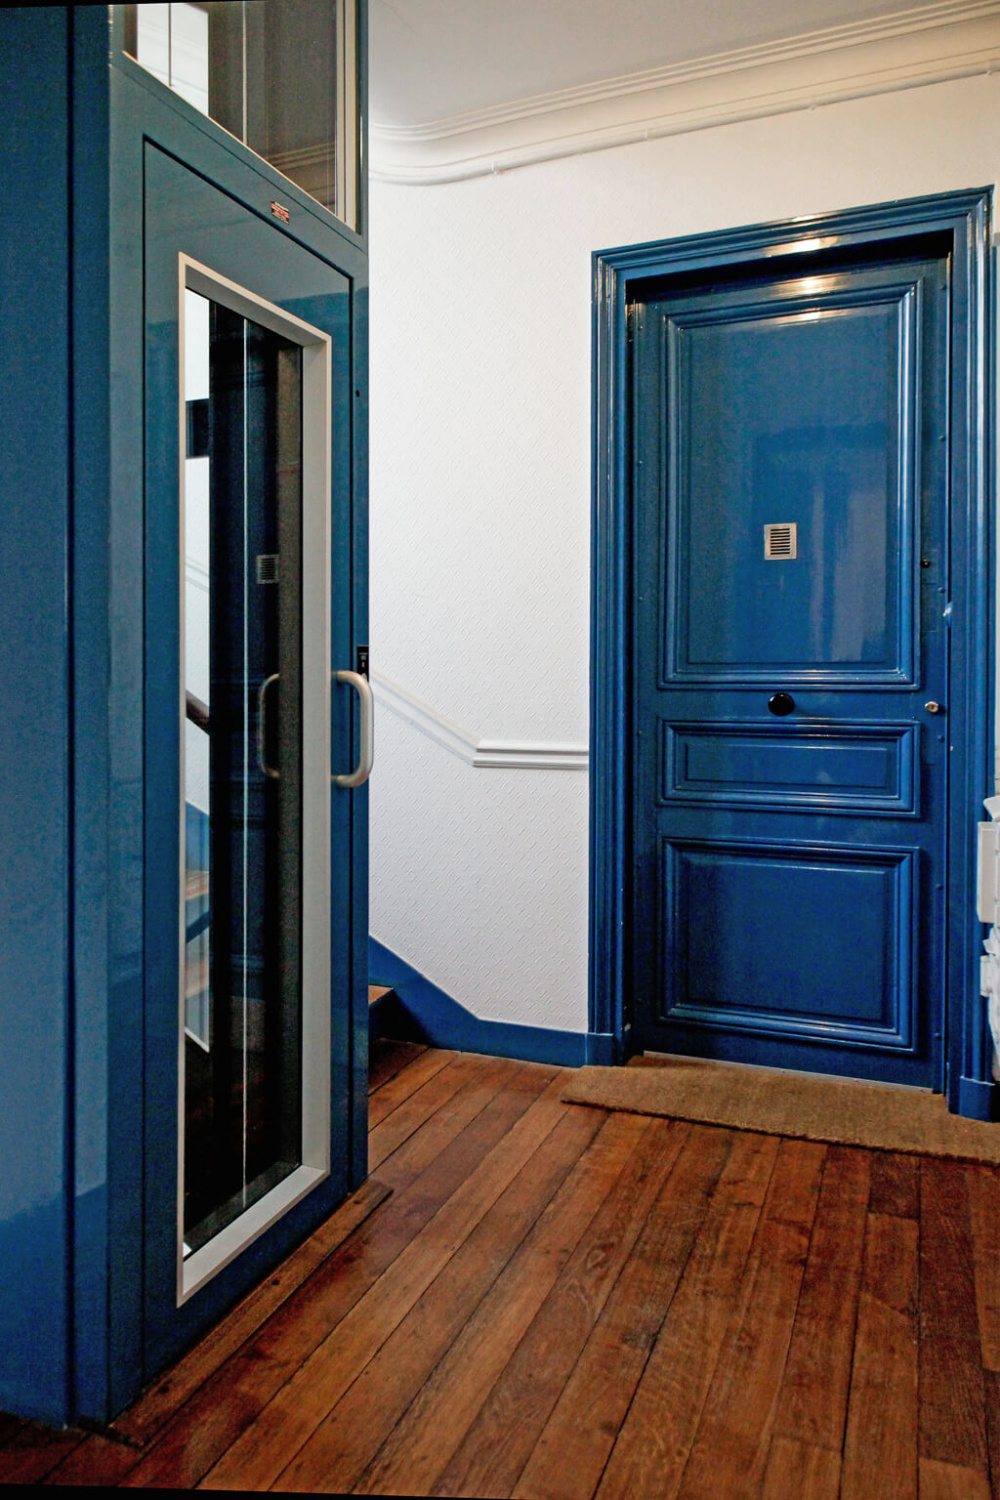 High gloss royal blue trim and doors in a Paris apartment building with elevator - Hello Lovely Studio.